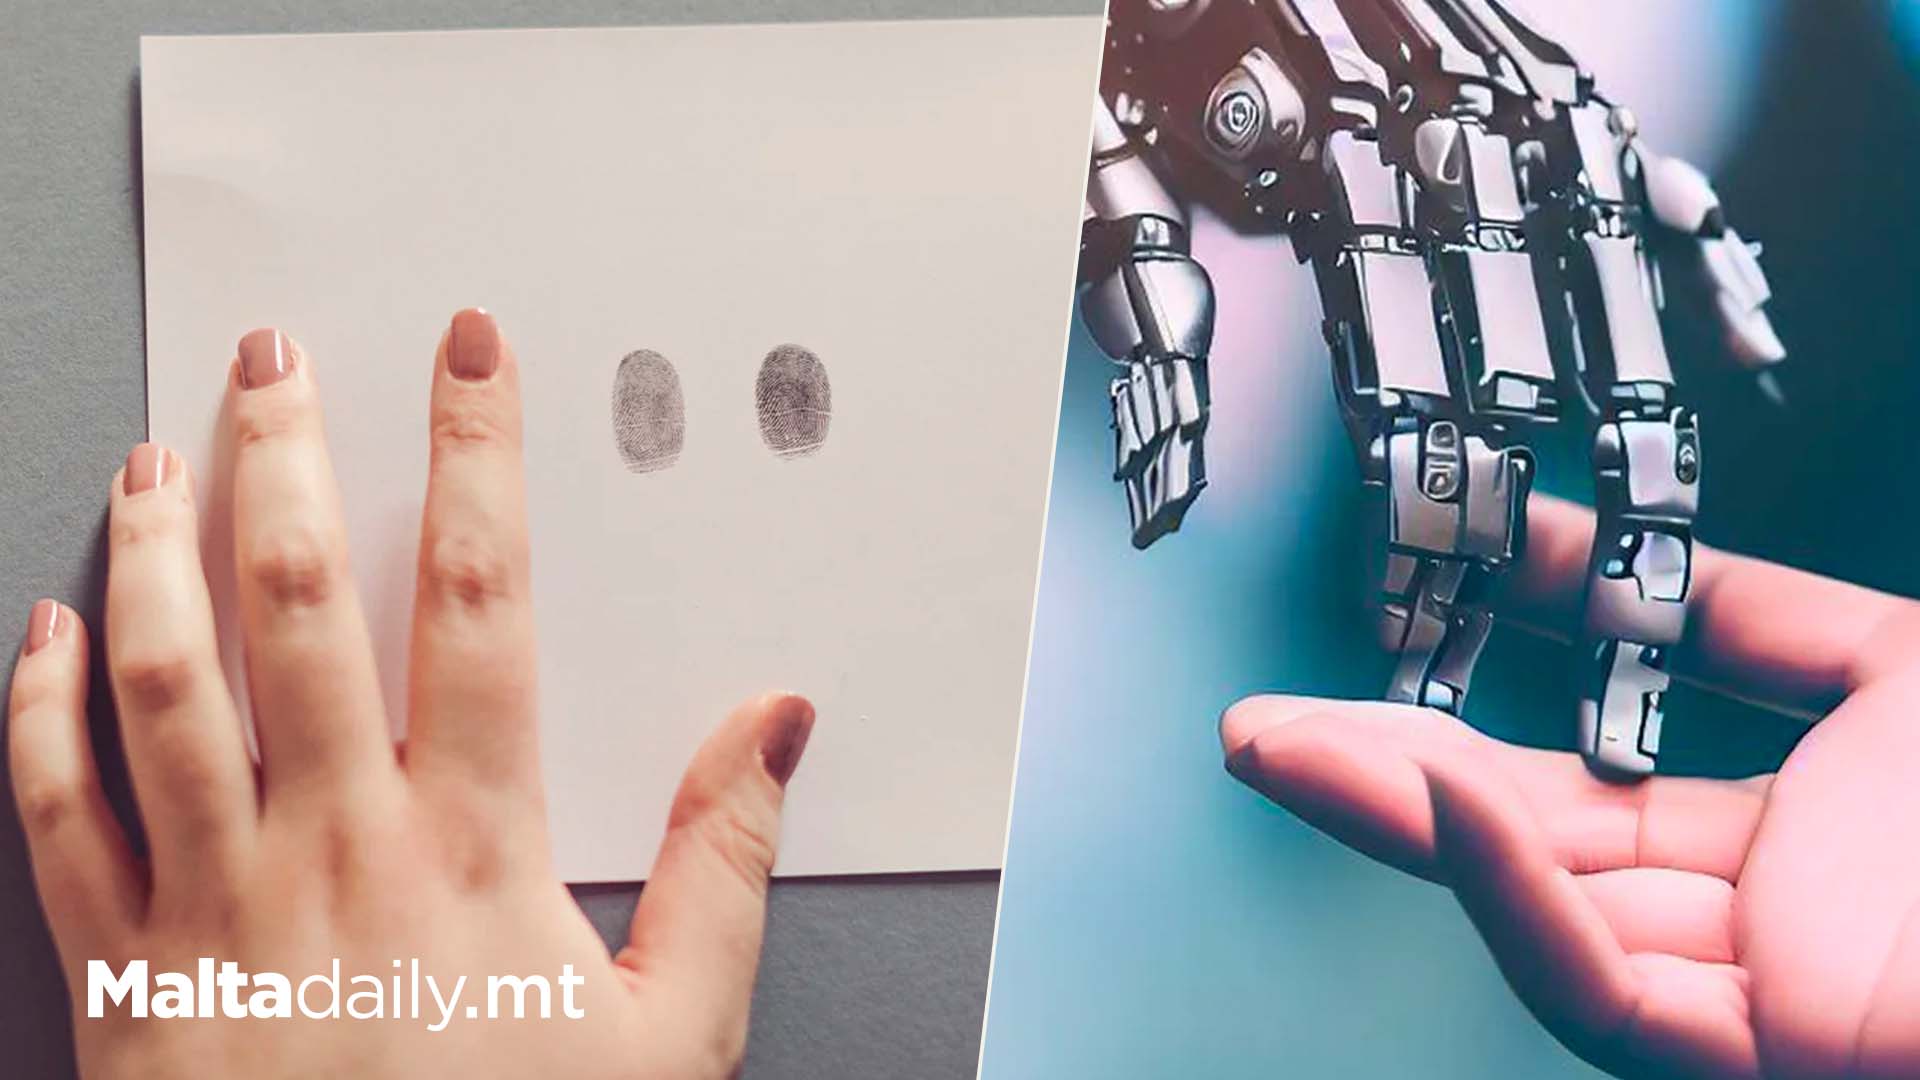 Our Finger Prints May Not Be Unique, AI Suggests